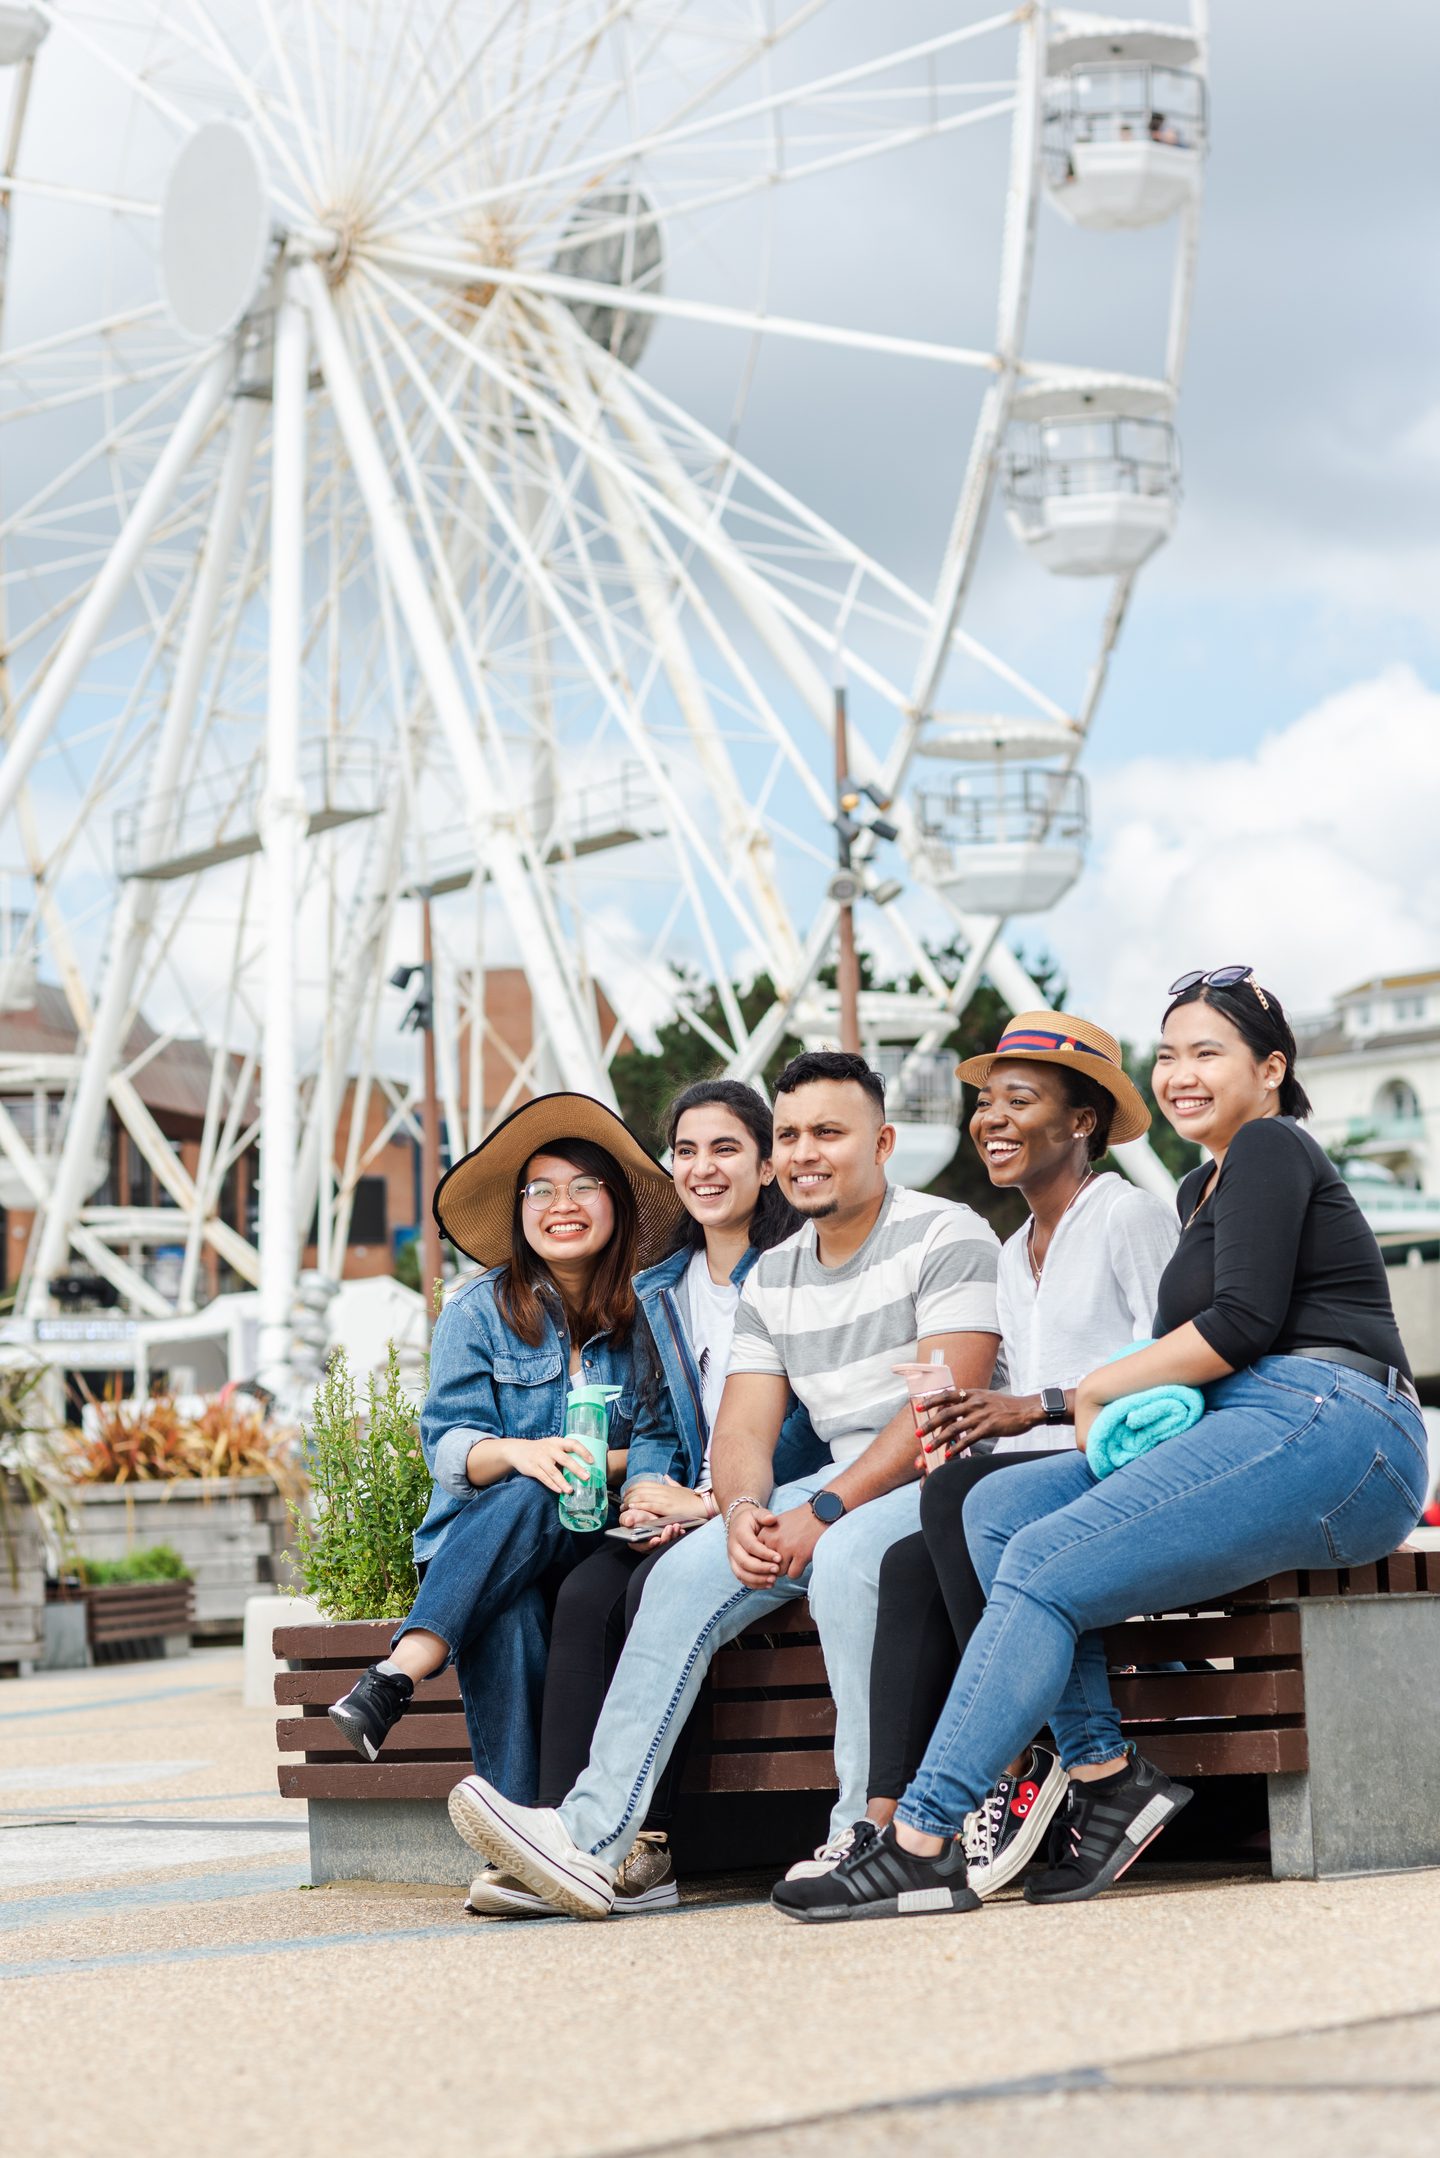 A group of five students on a bench with a ferris-wheel in the background